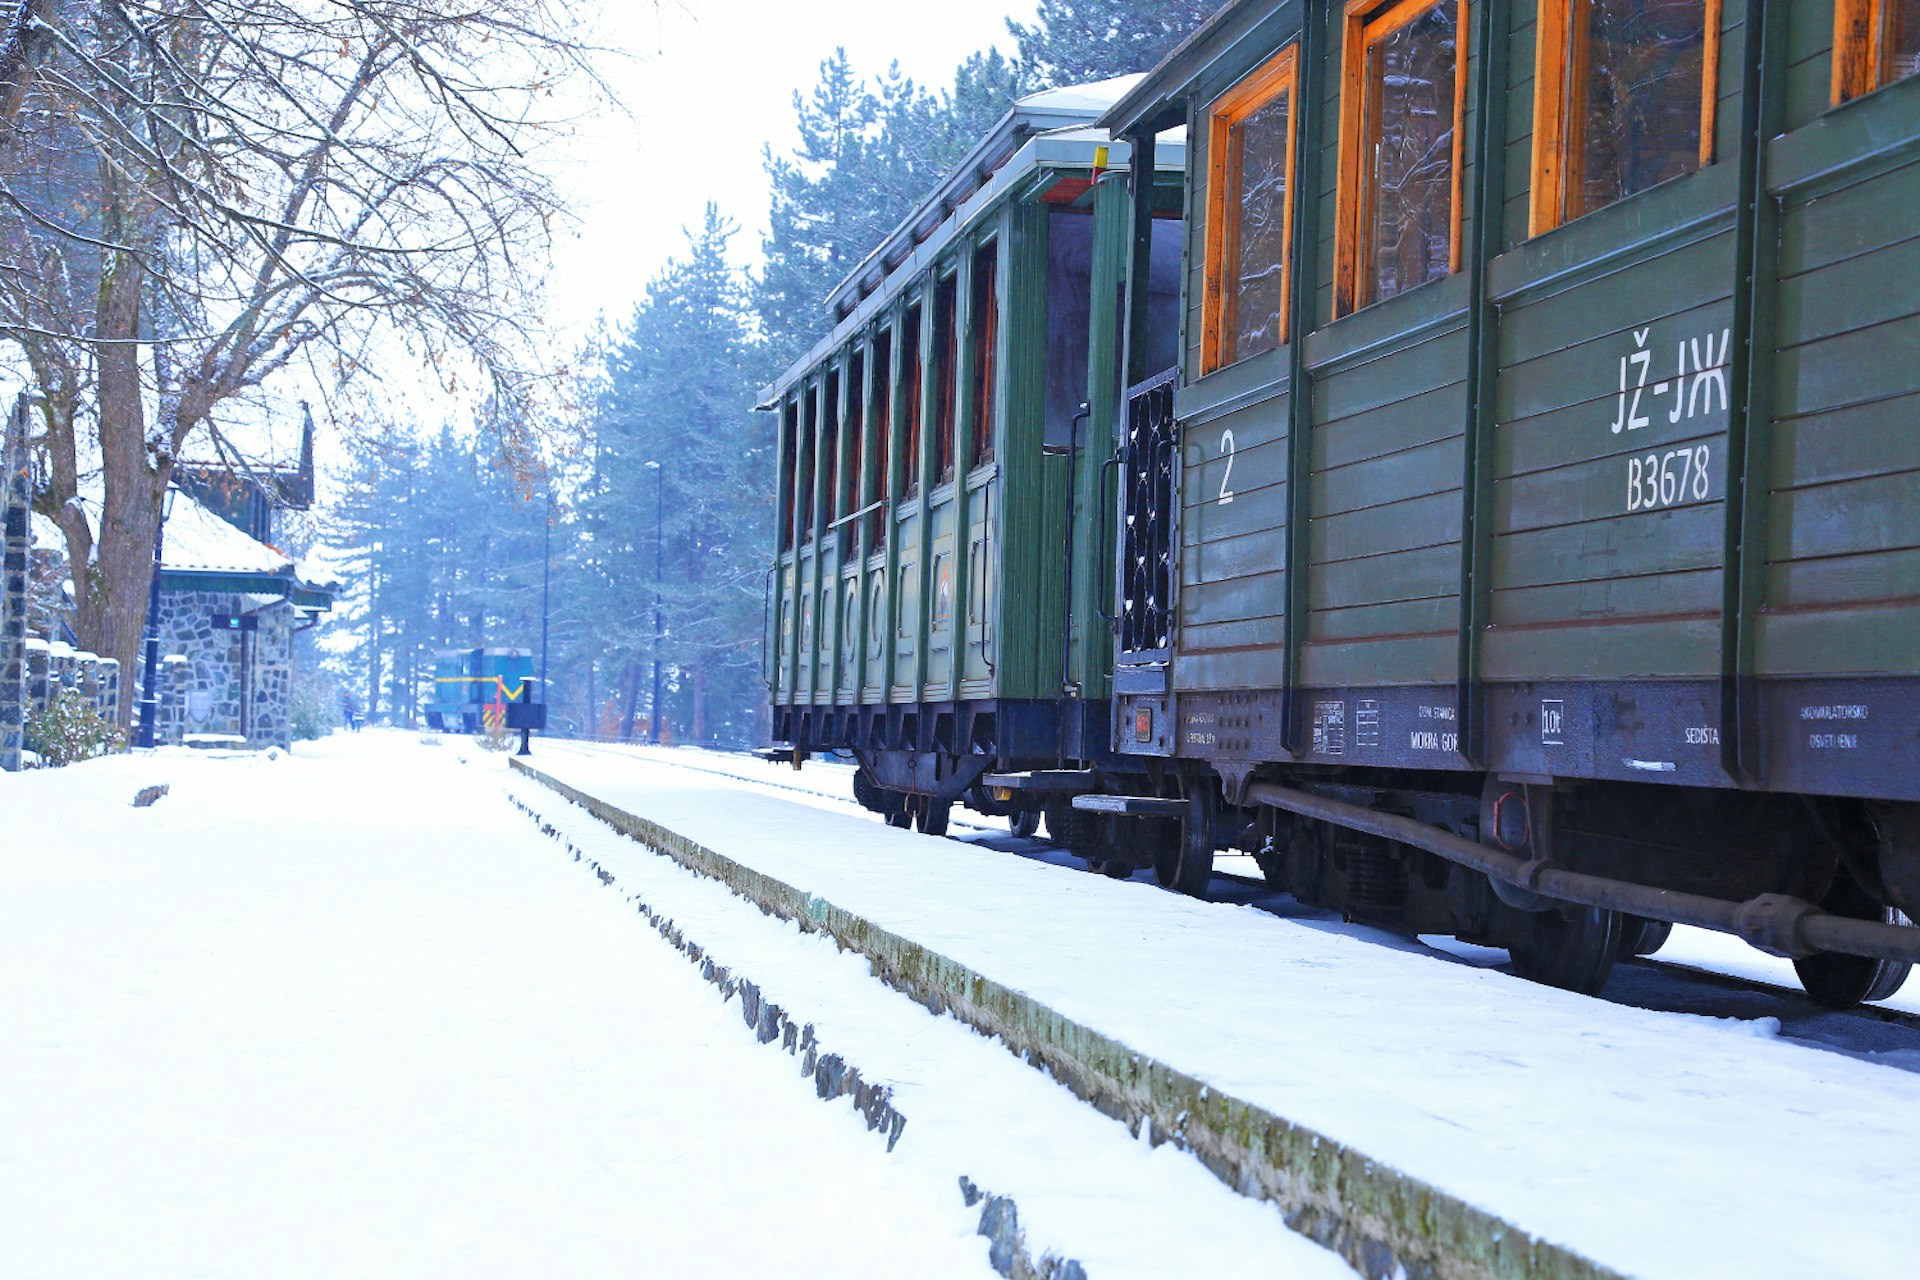 Two dark green wooden carriages of the Šargan Eight narrow-gauge heritage railway stand in the snow